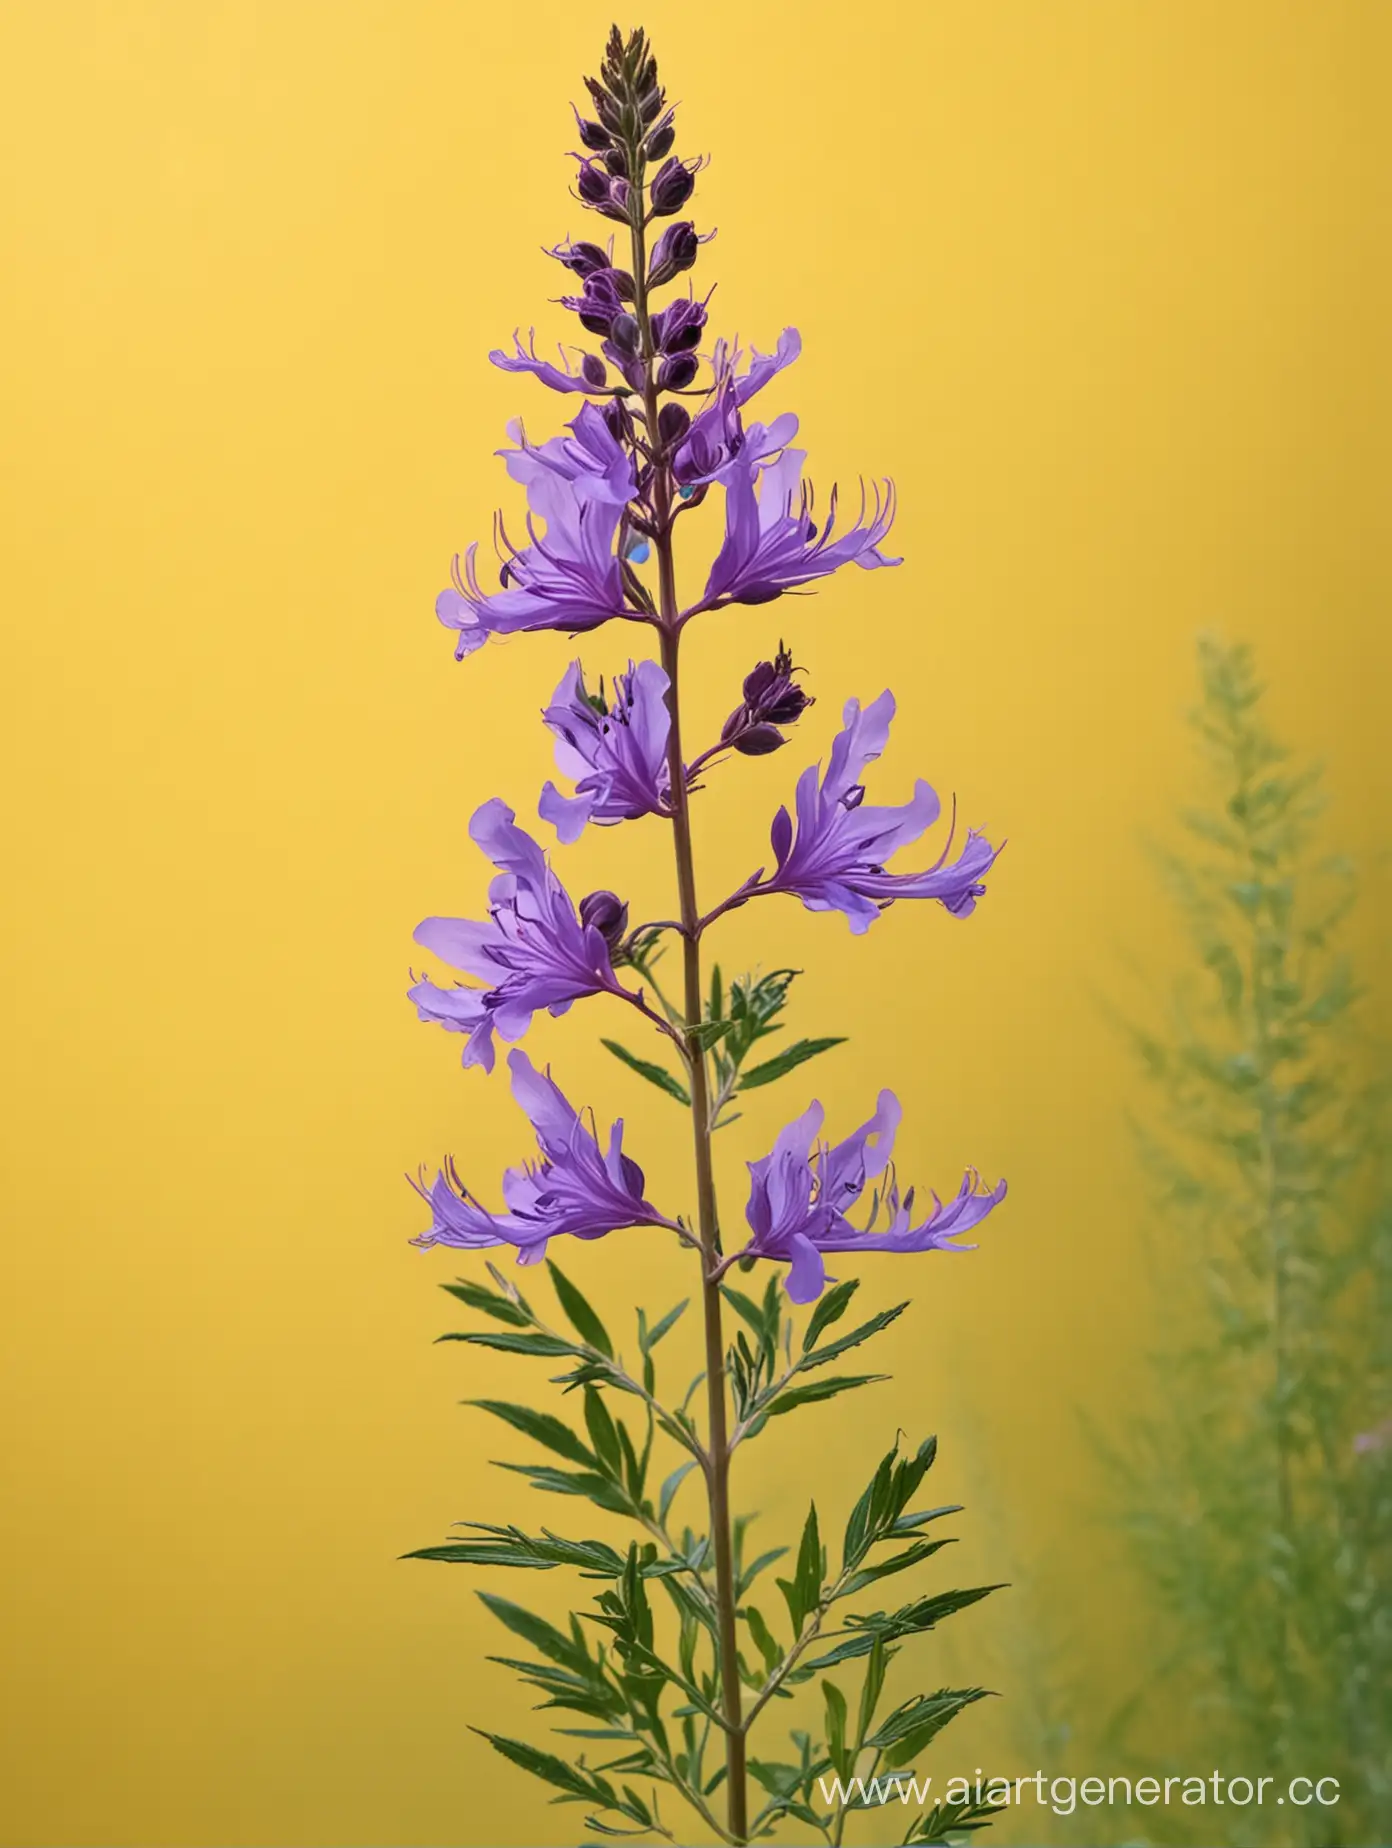 Wild-Blue-Fireweed-Blossoms-on-Vibrant-Yellow-Background